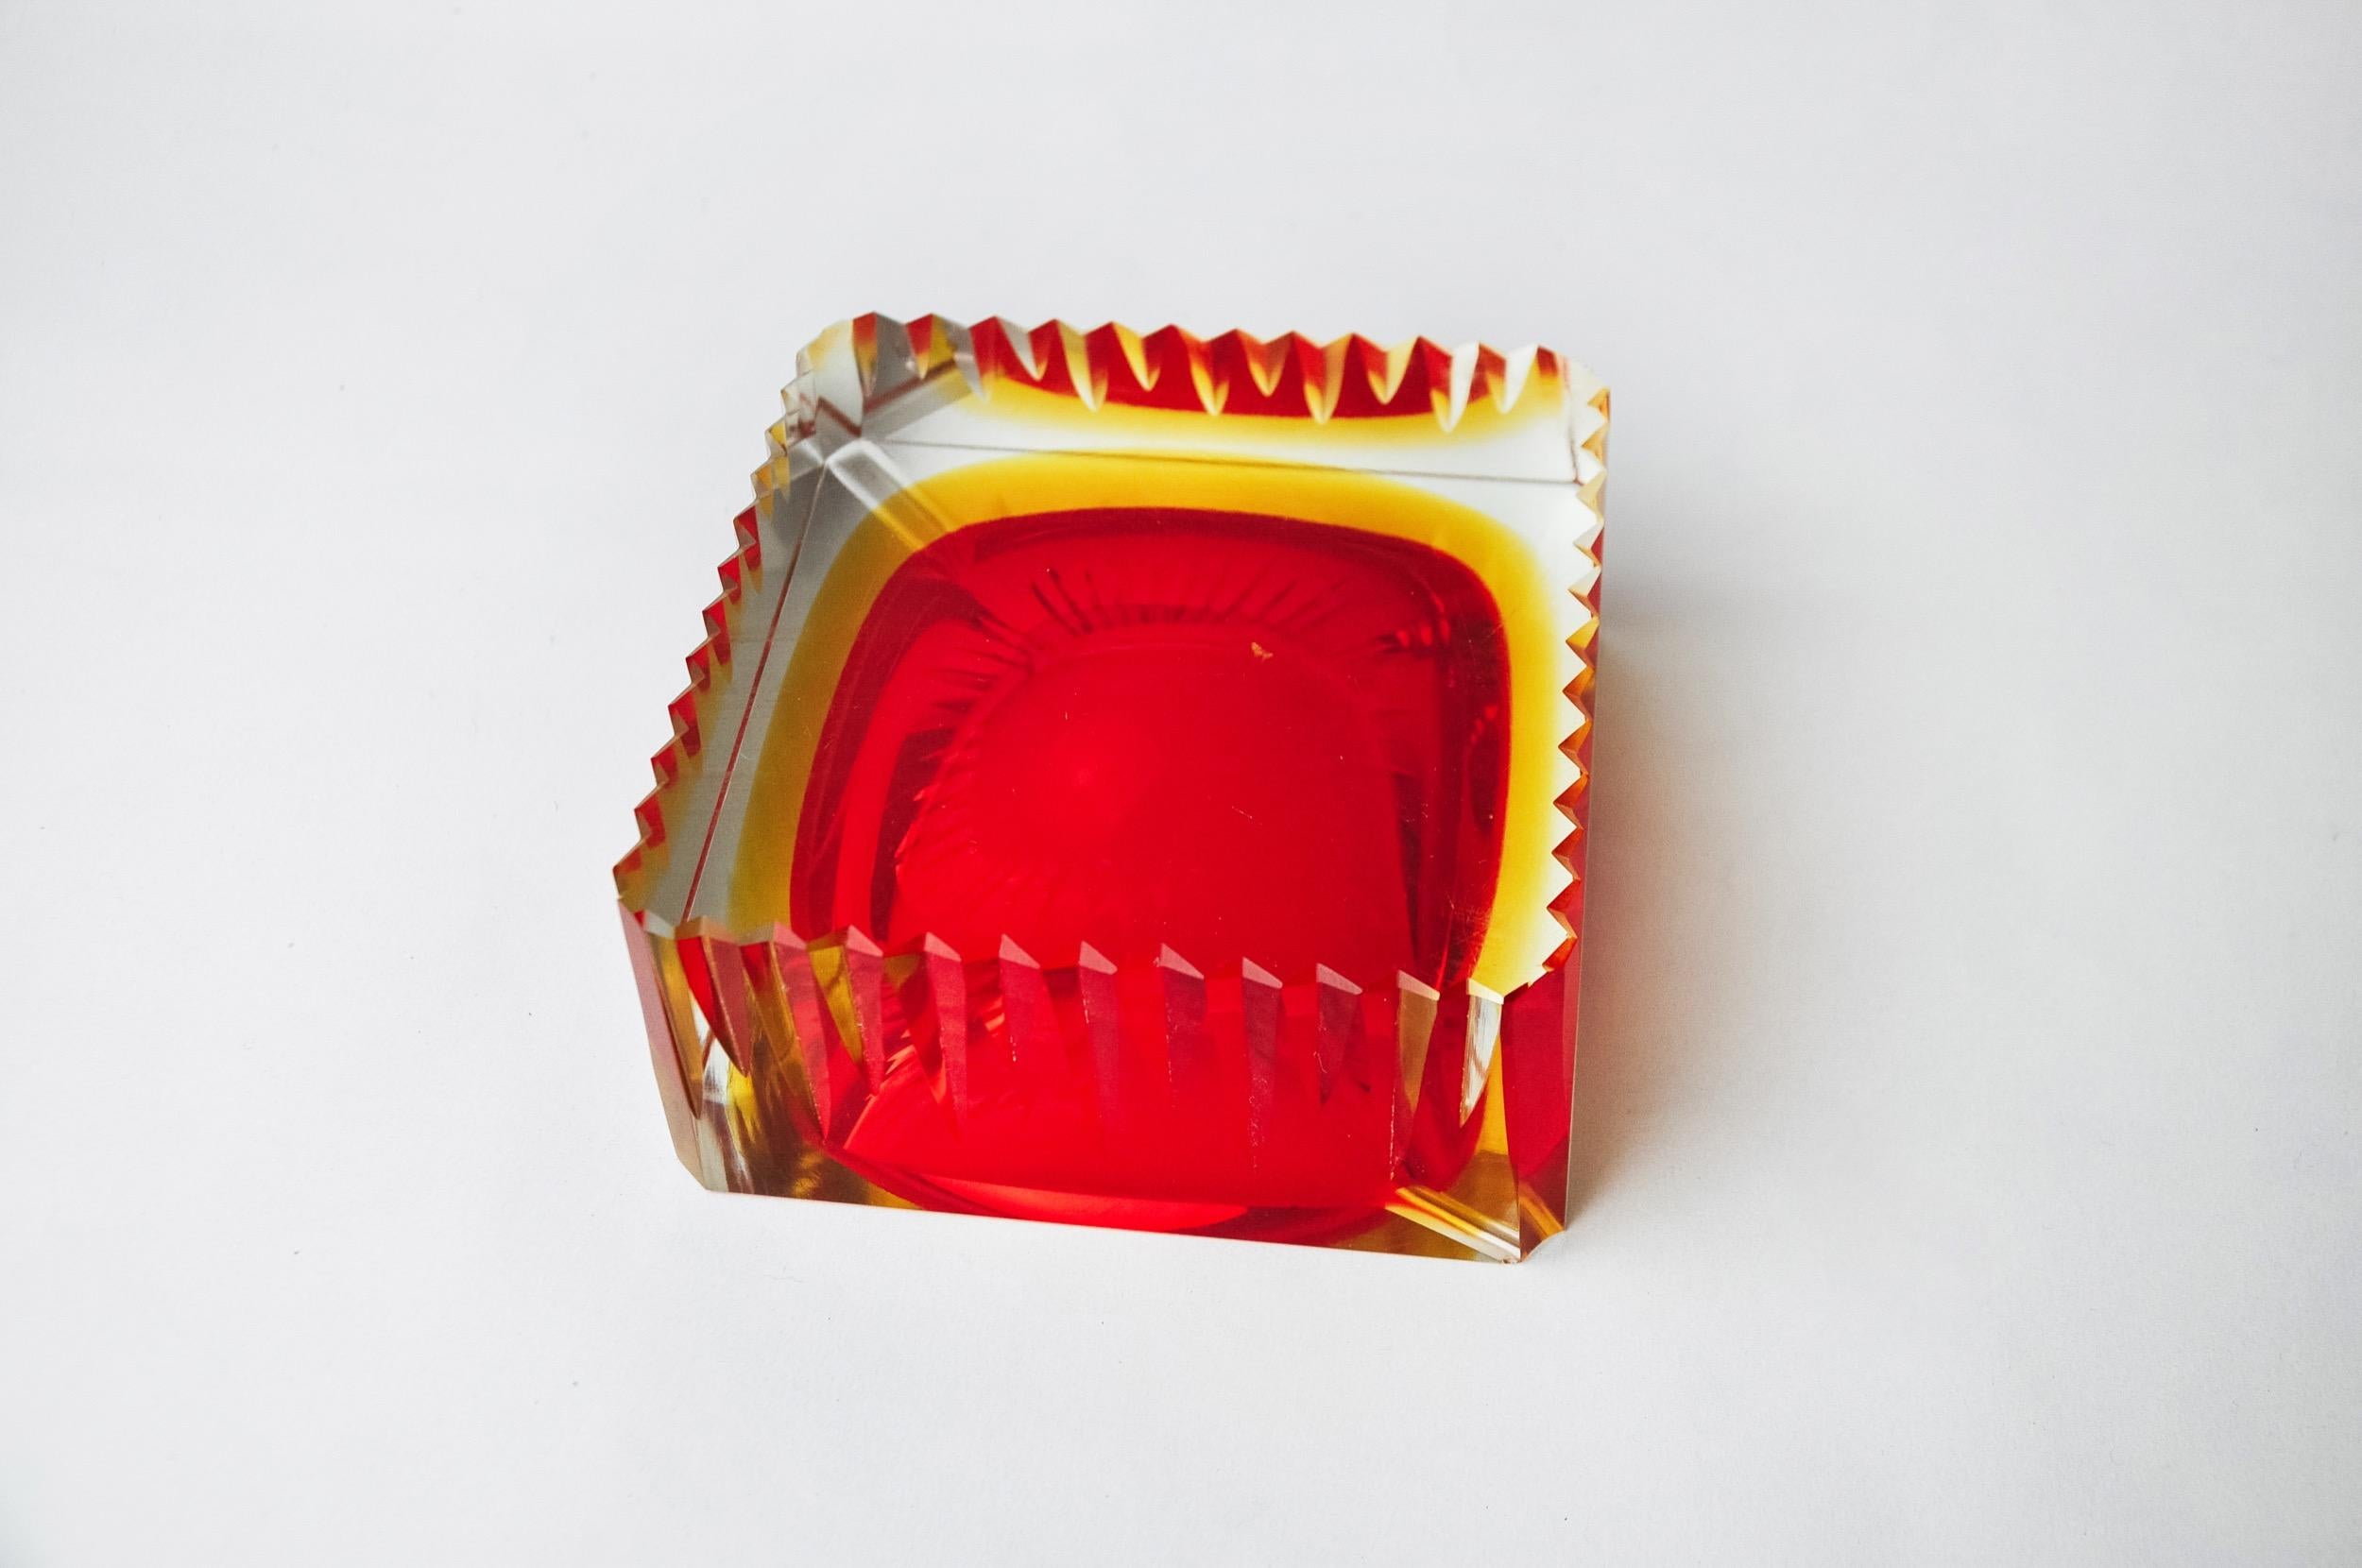 Crystal Red and yellow cubic Sommerso ashtray by Seguso, Murano, Italy, 1970 For Sale